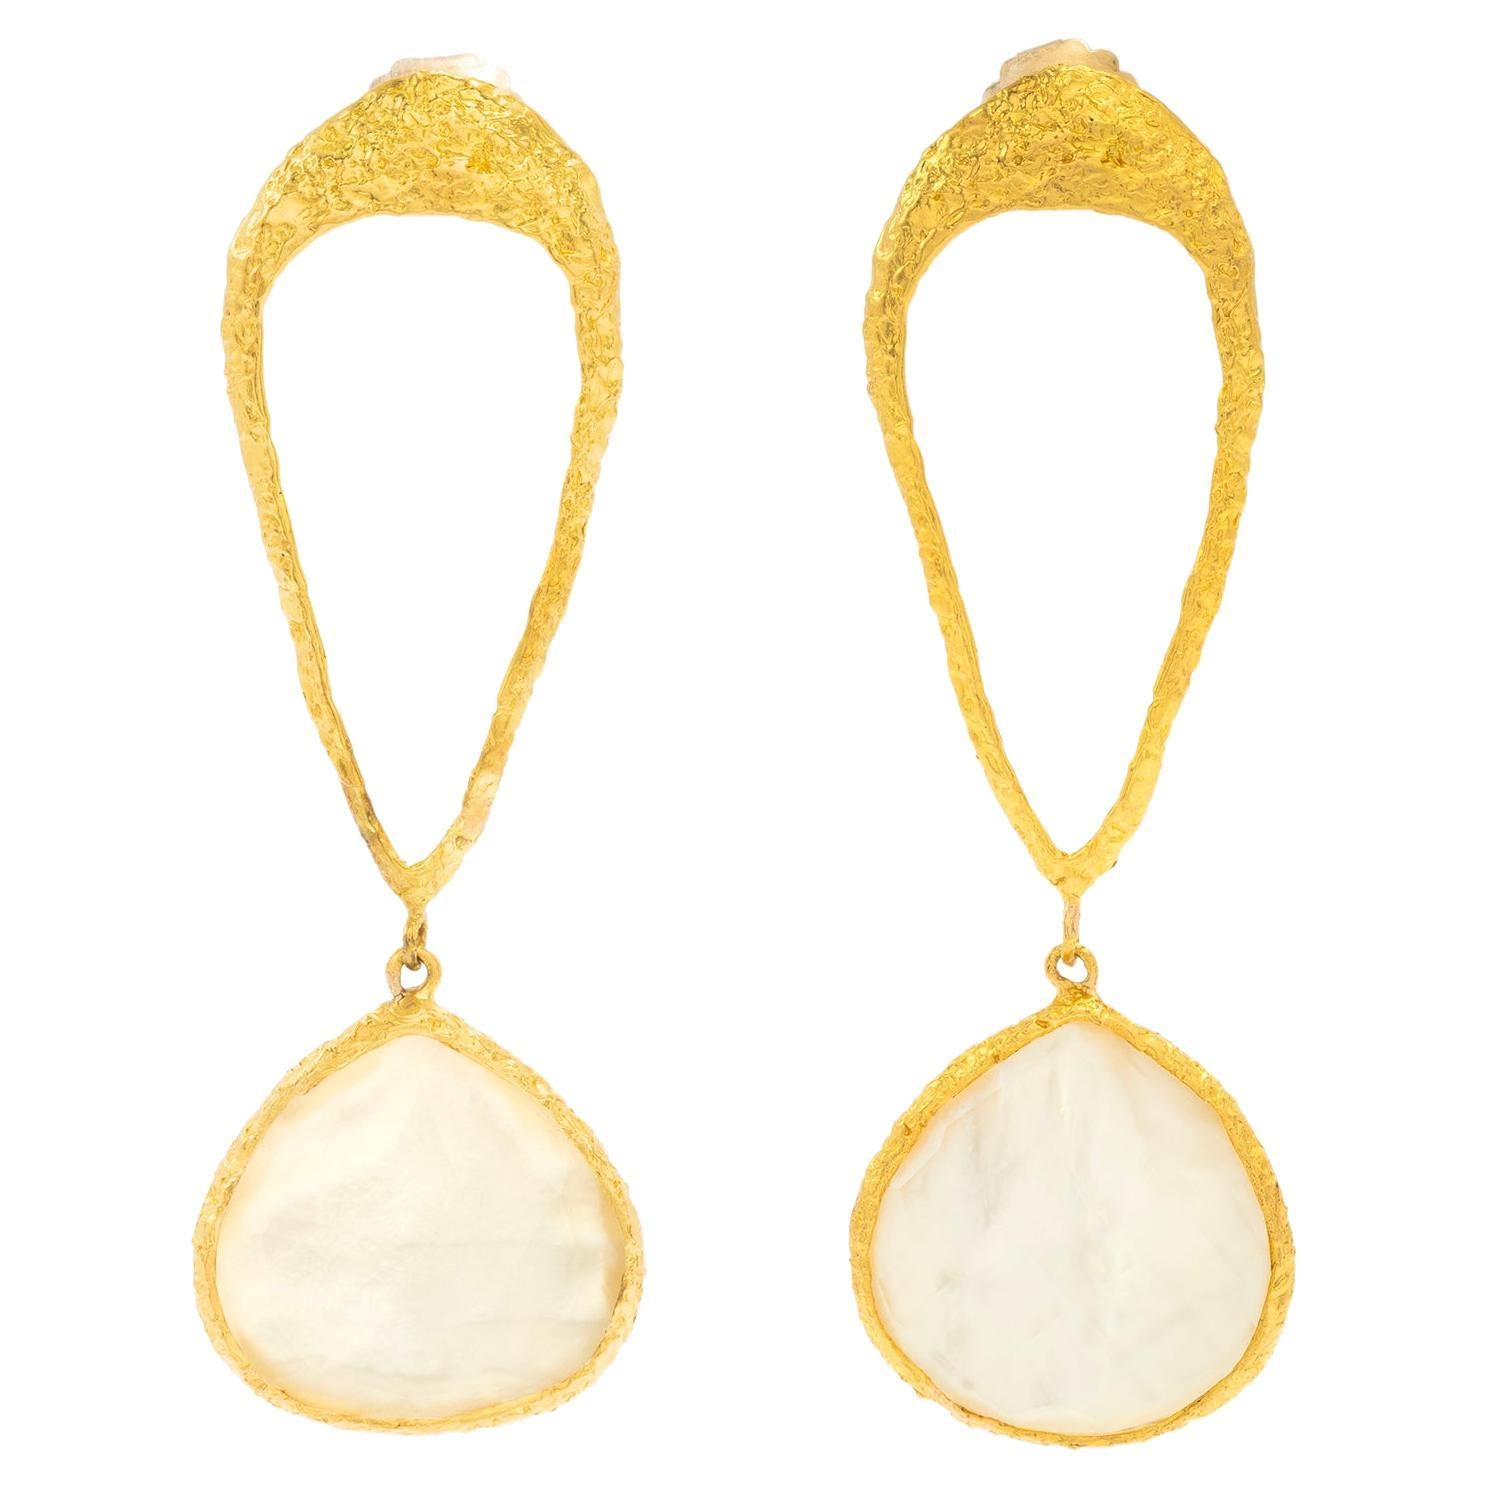 Soleil 22k Gold Pearl and Crystal Signature Teardrop Earrings, by Tagili